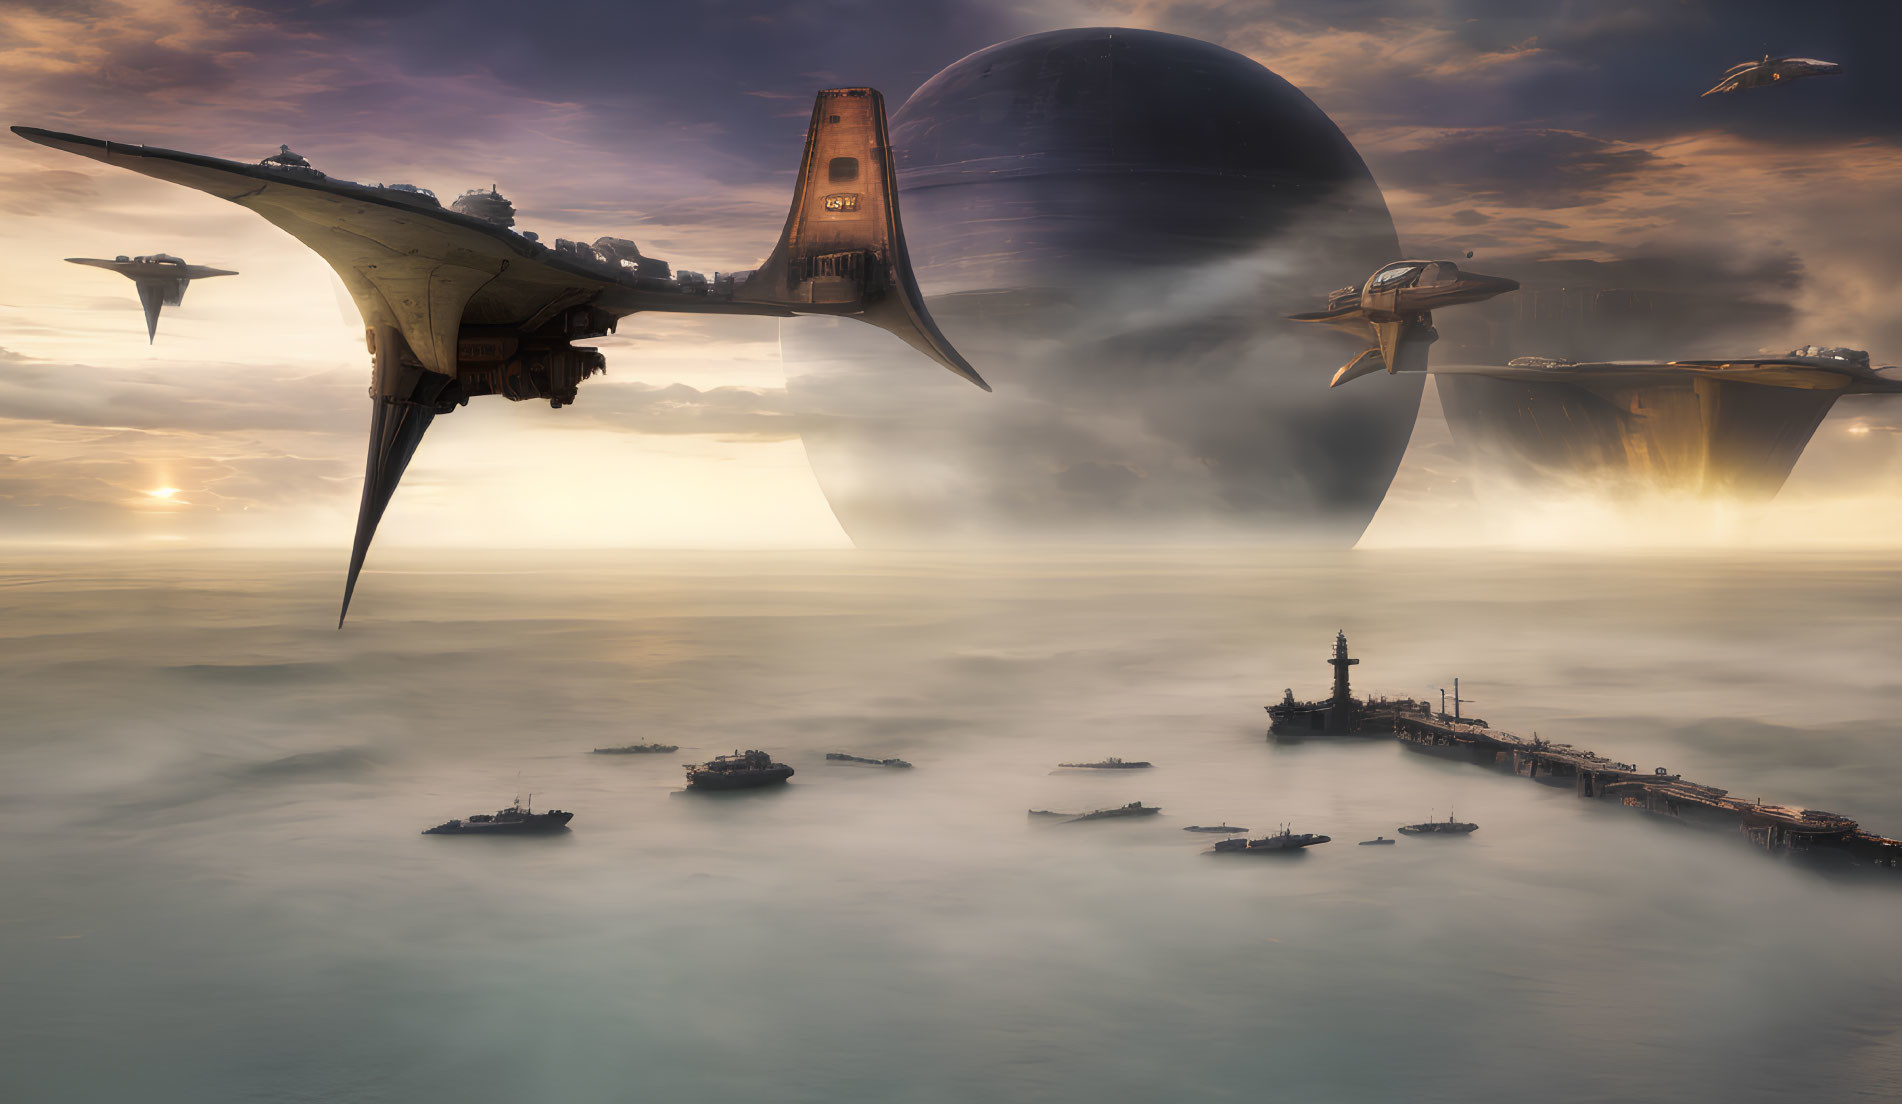 Futuristic fleet with large spaceship near docking station above cloud-covered seas